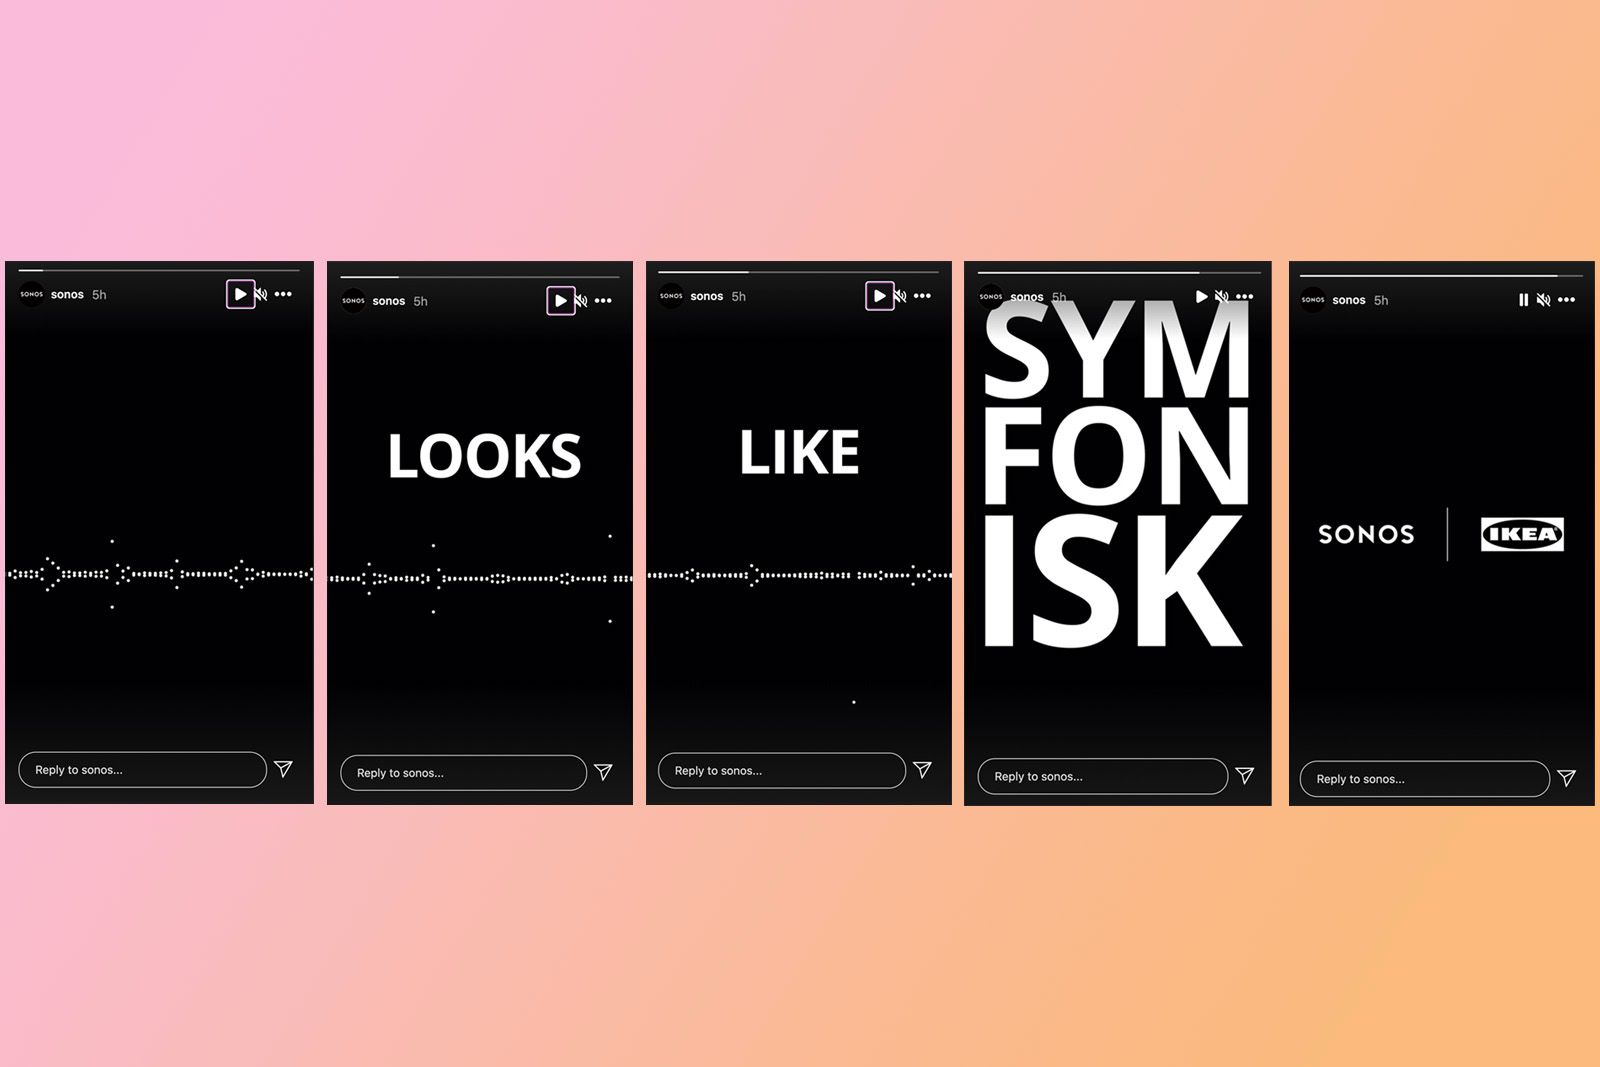 Sonos confirms new Symfonisk speaker is coming photo 1